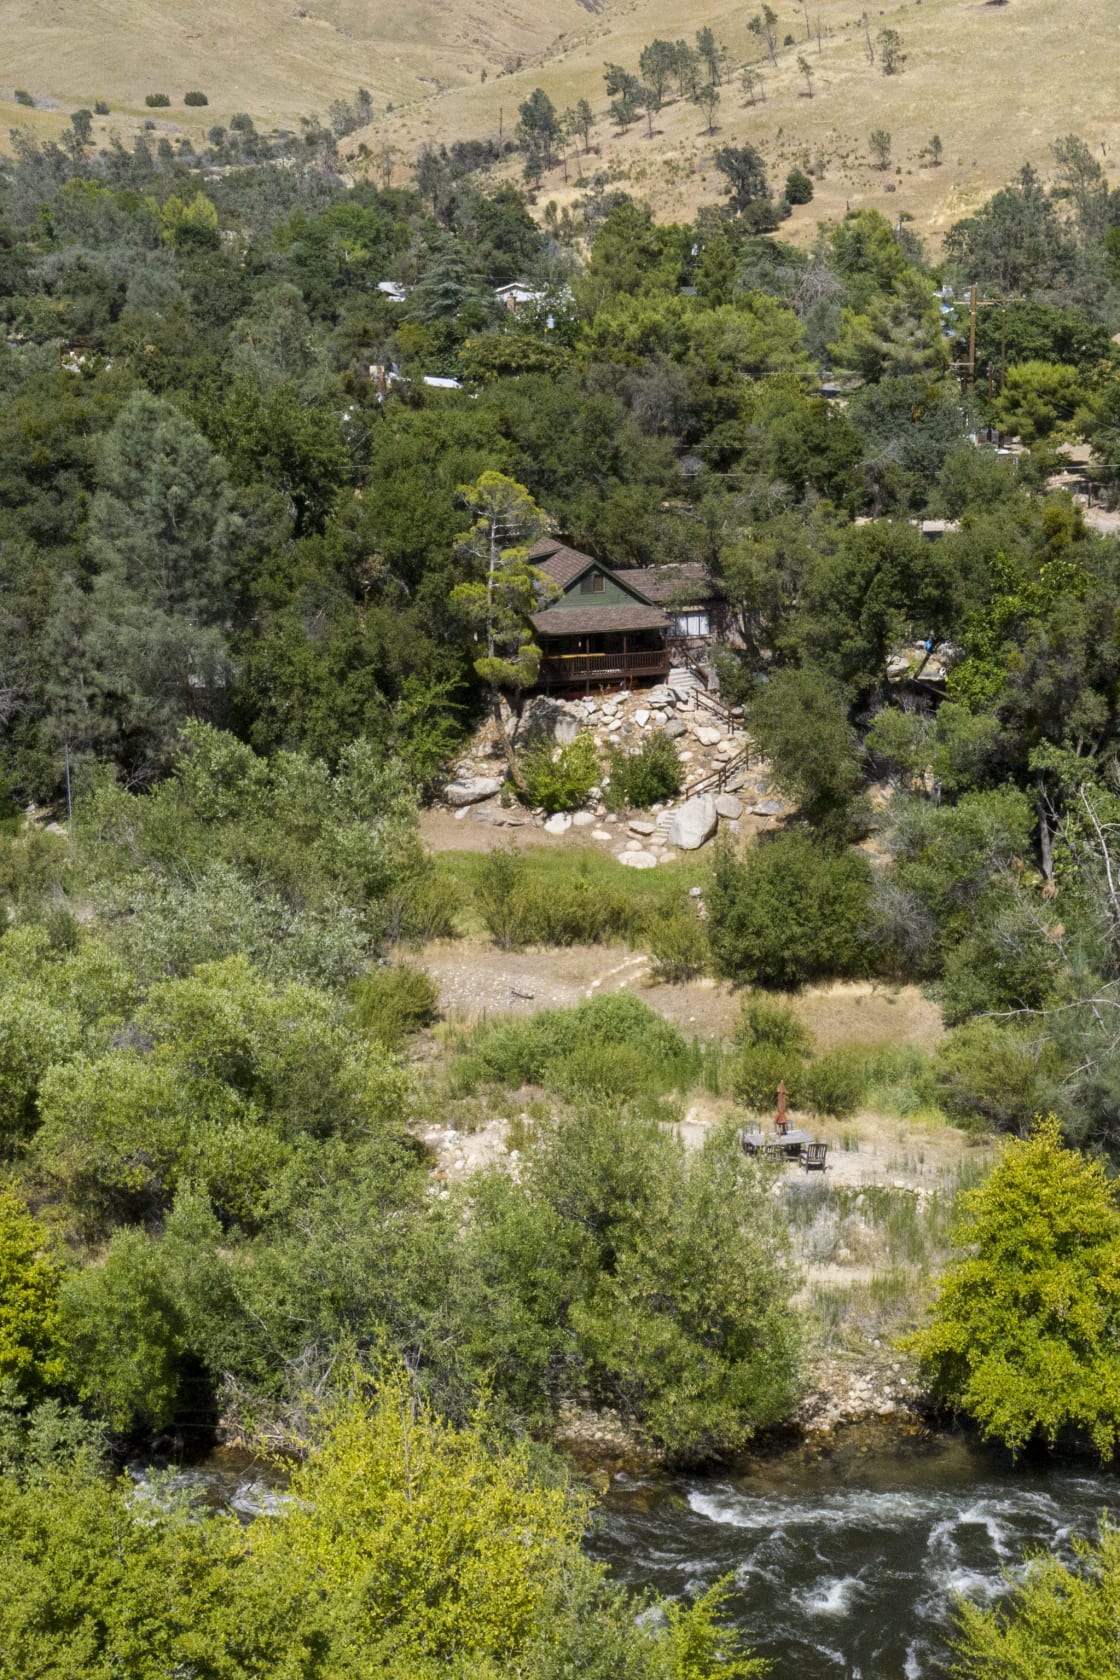 Cabin property borders the Kern River